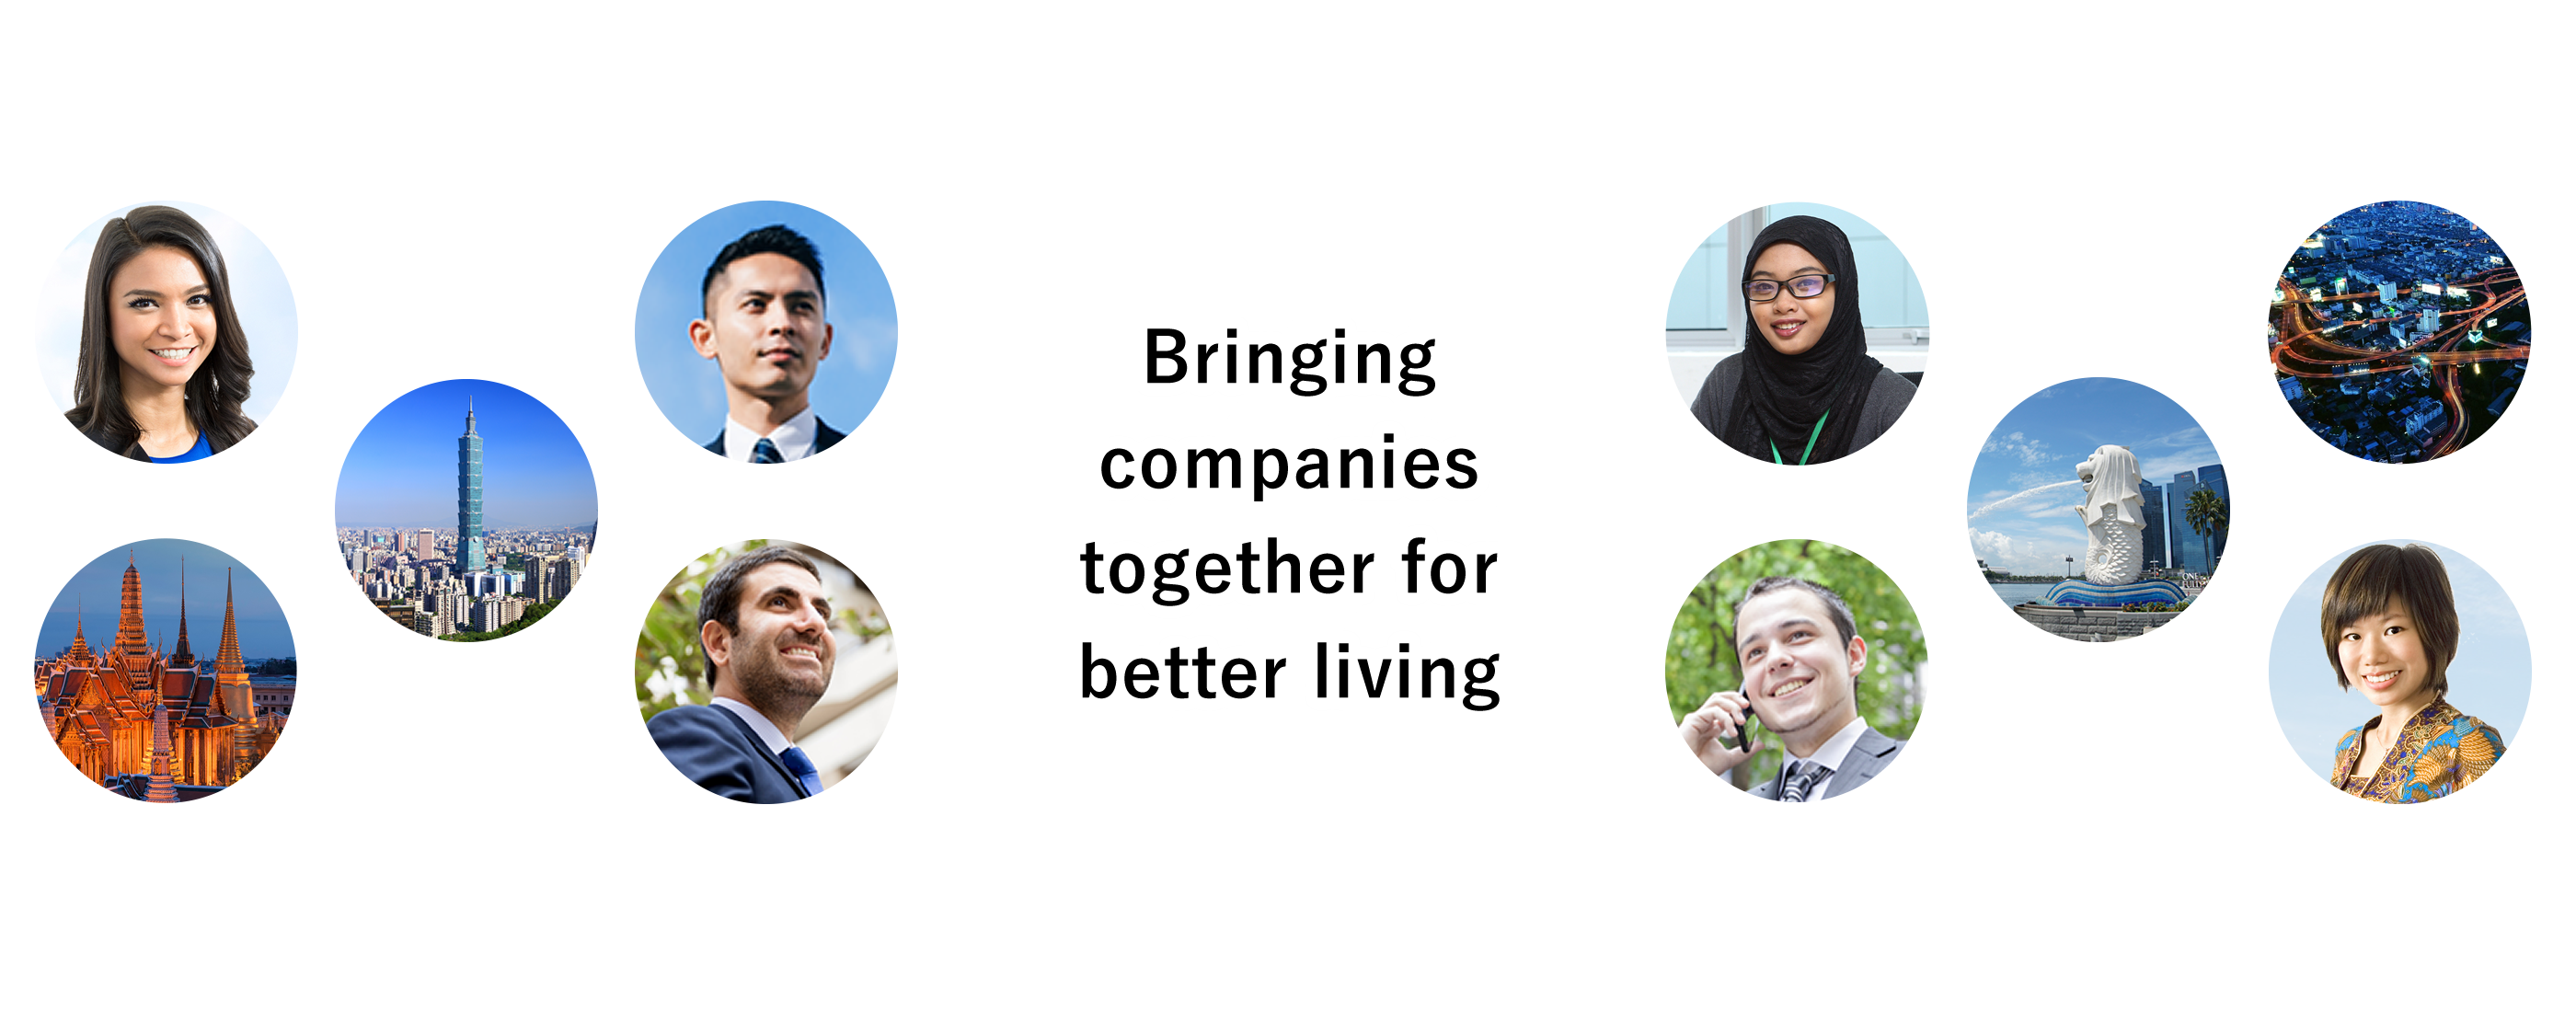 Bringing companies together for better living